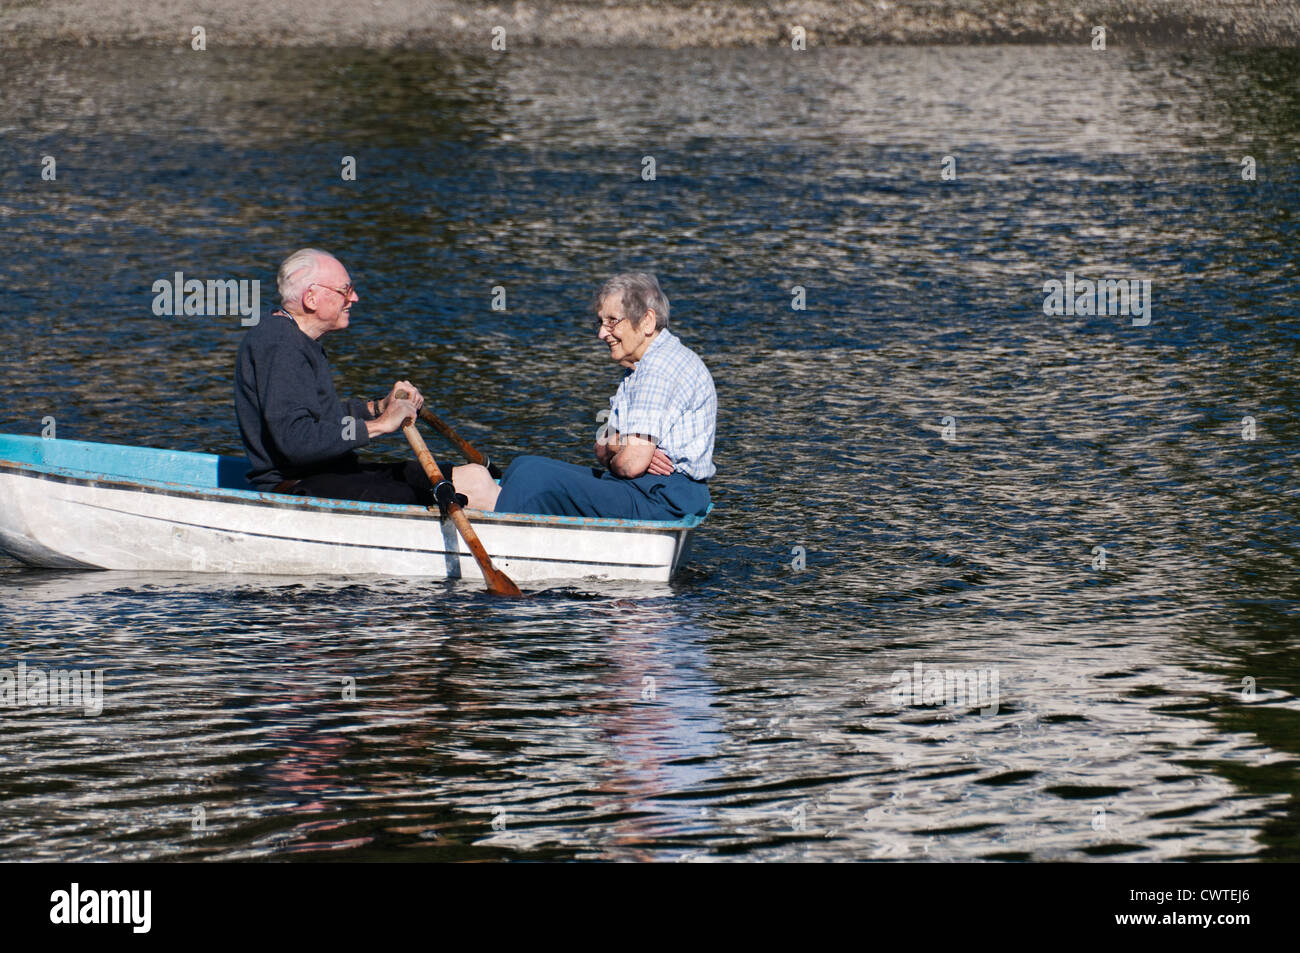 An active, smiling, mature senior adult couple enjoys a summer day on Puget Sound in their rowboat. Stock Photo